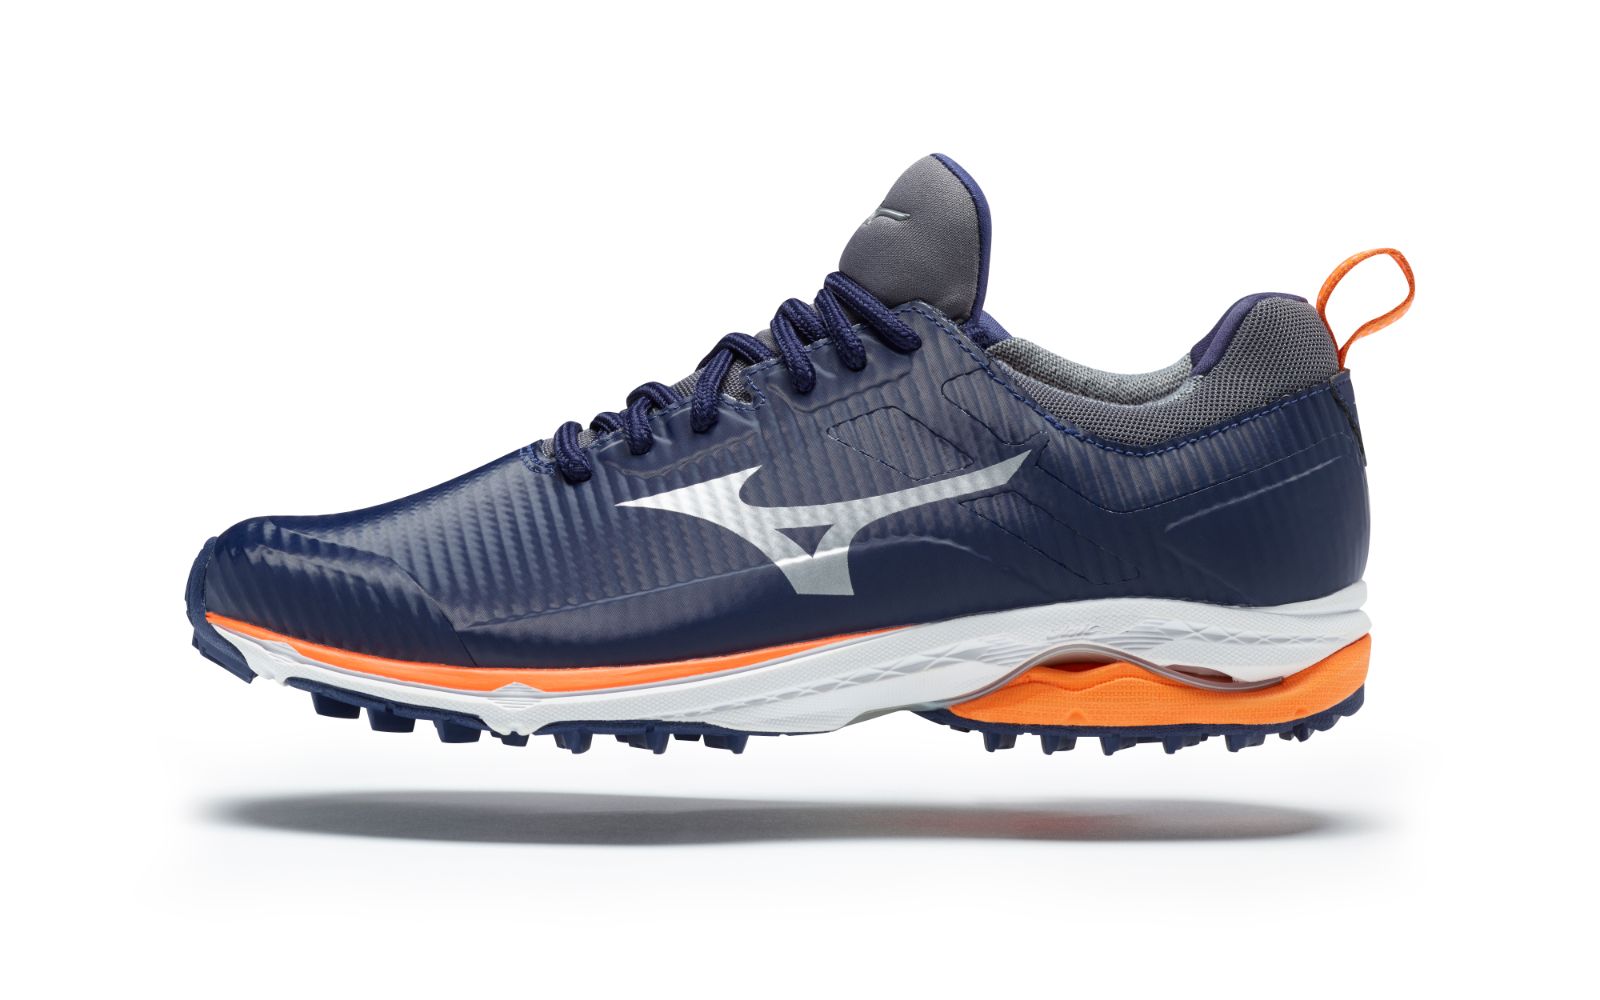 about mizuno shoes